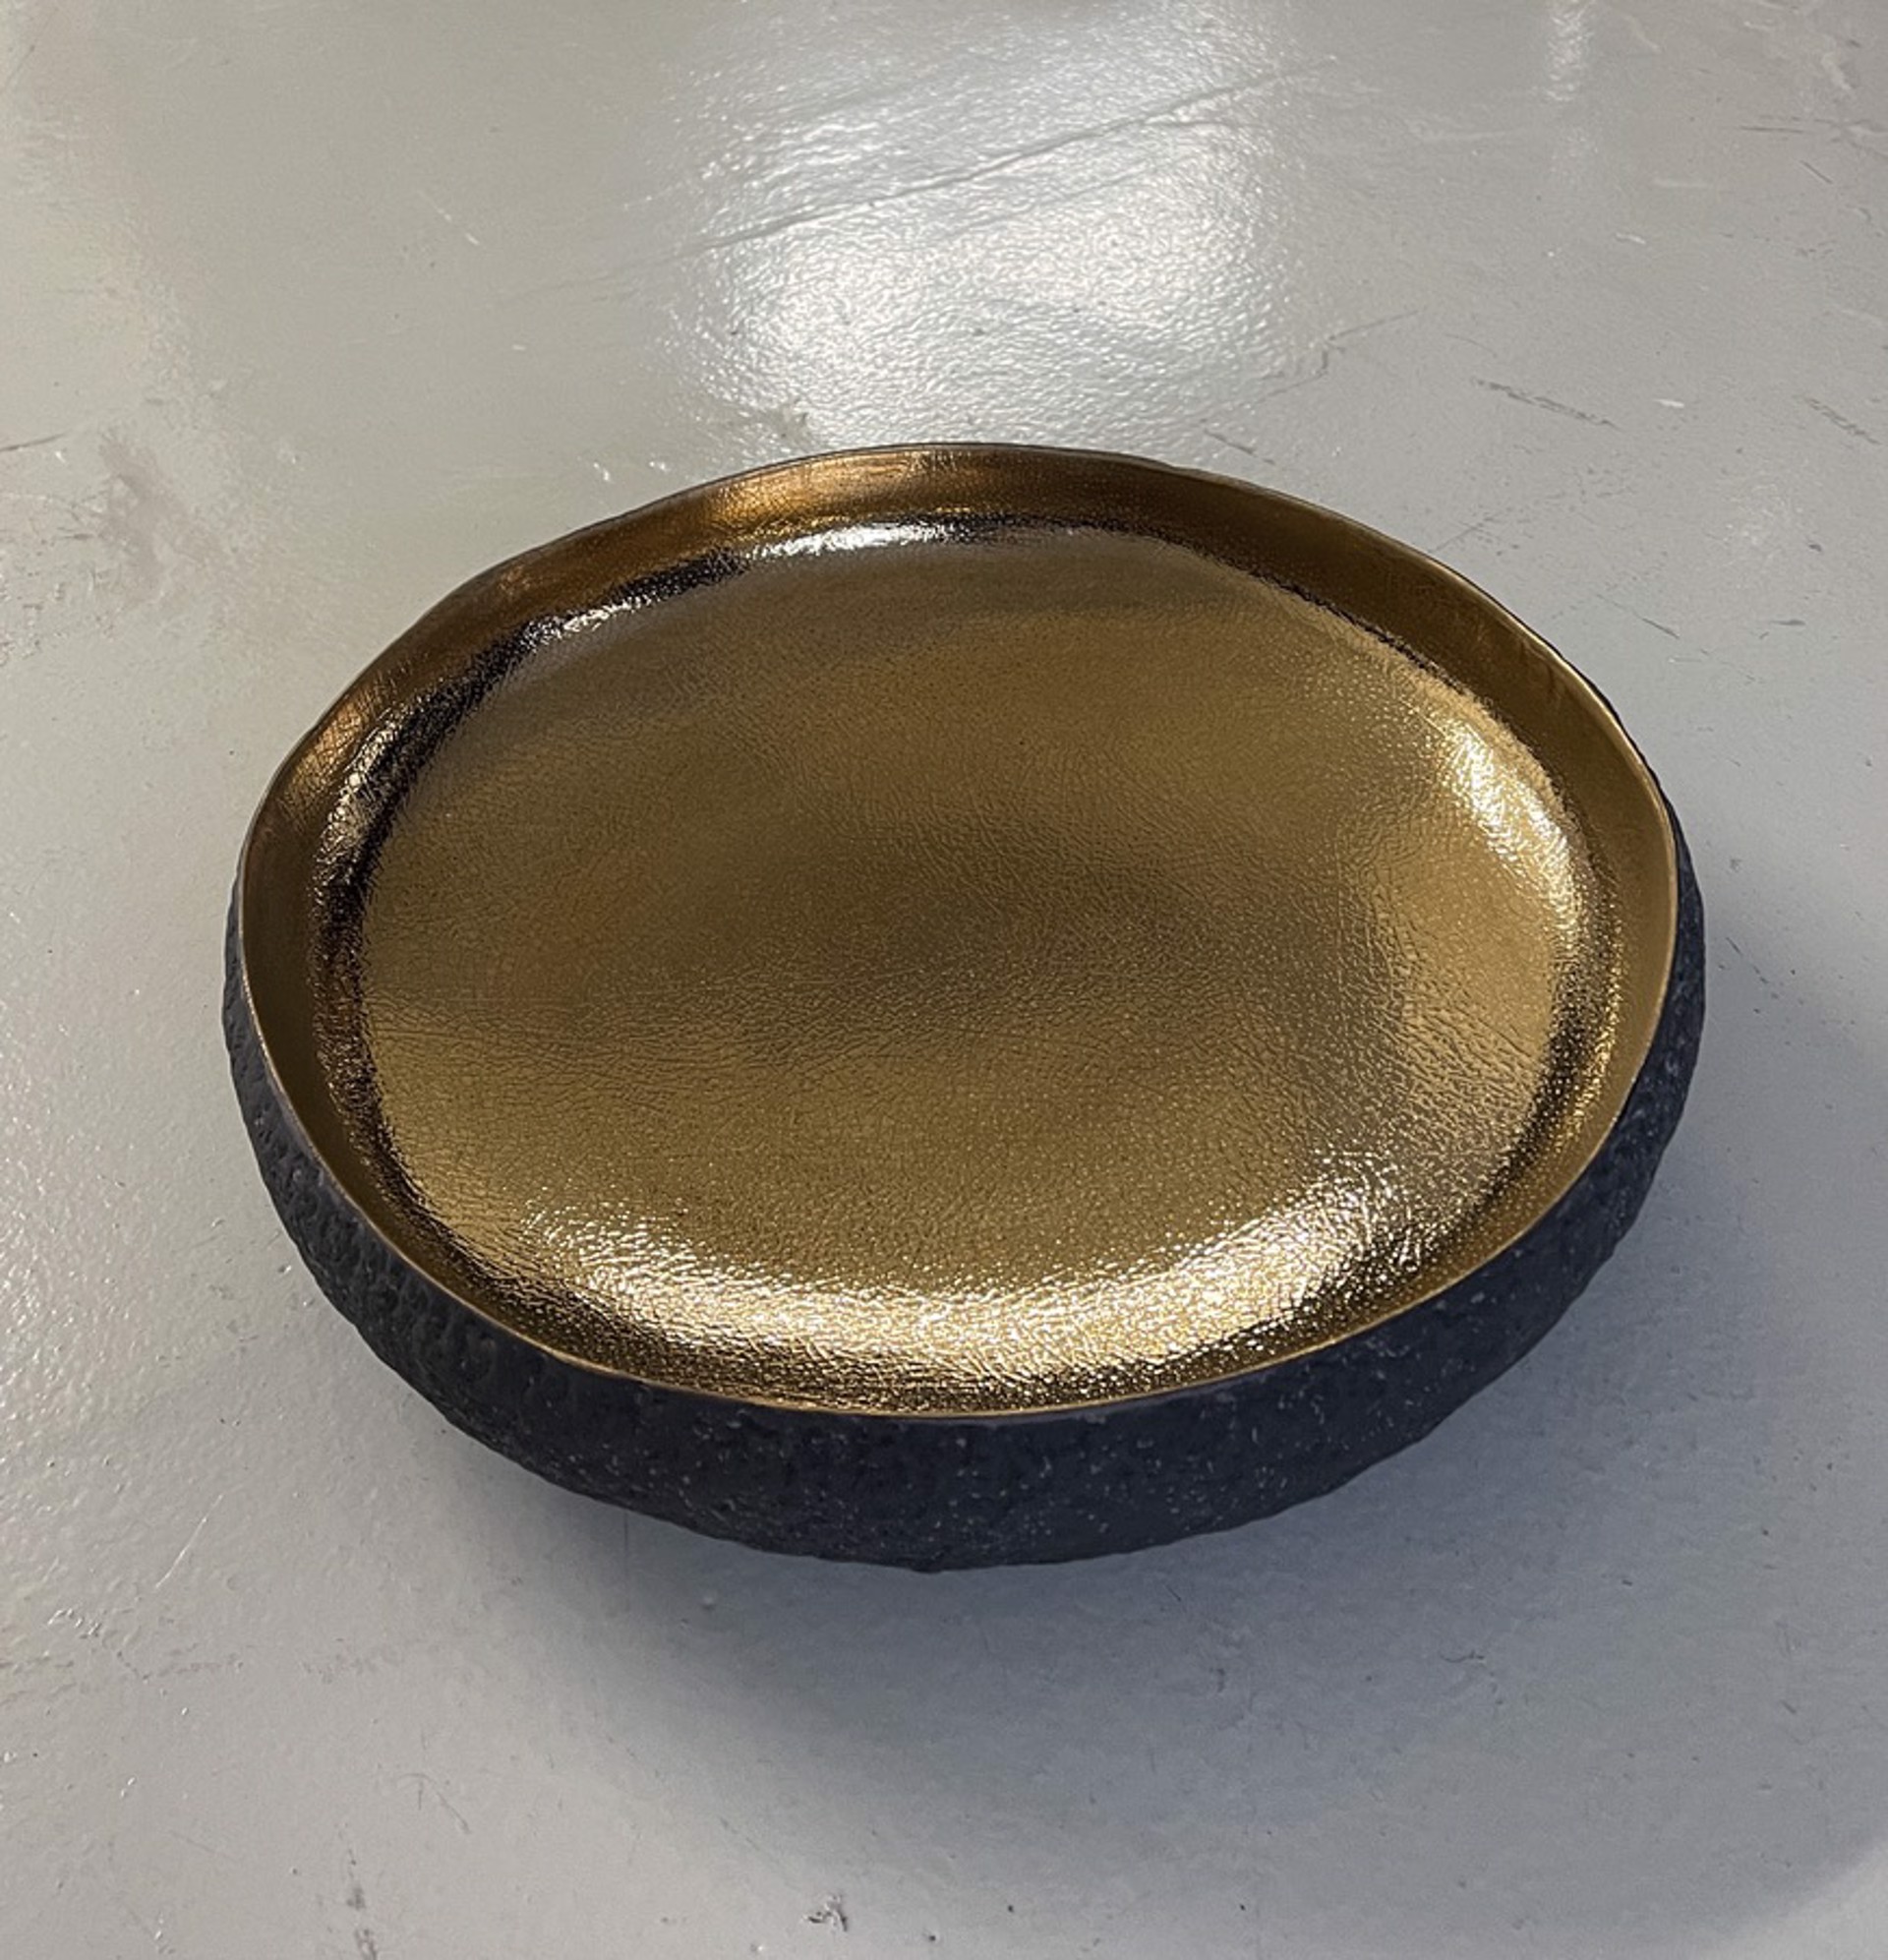 Round bowl with old gold by Cristina Salusti